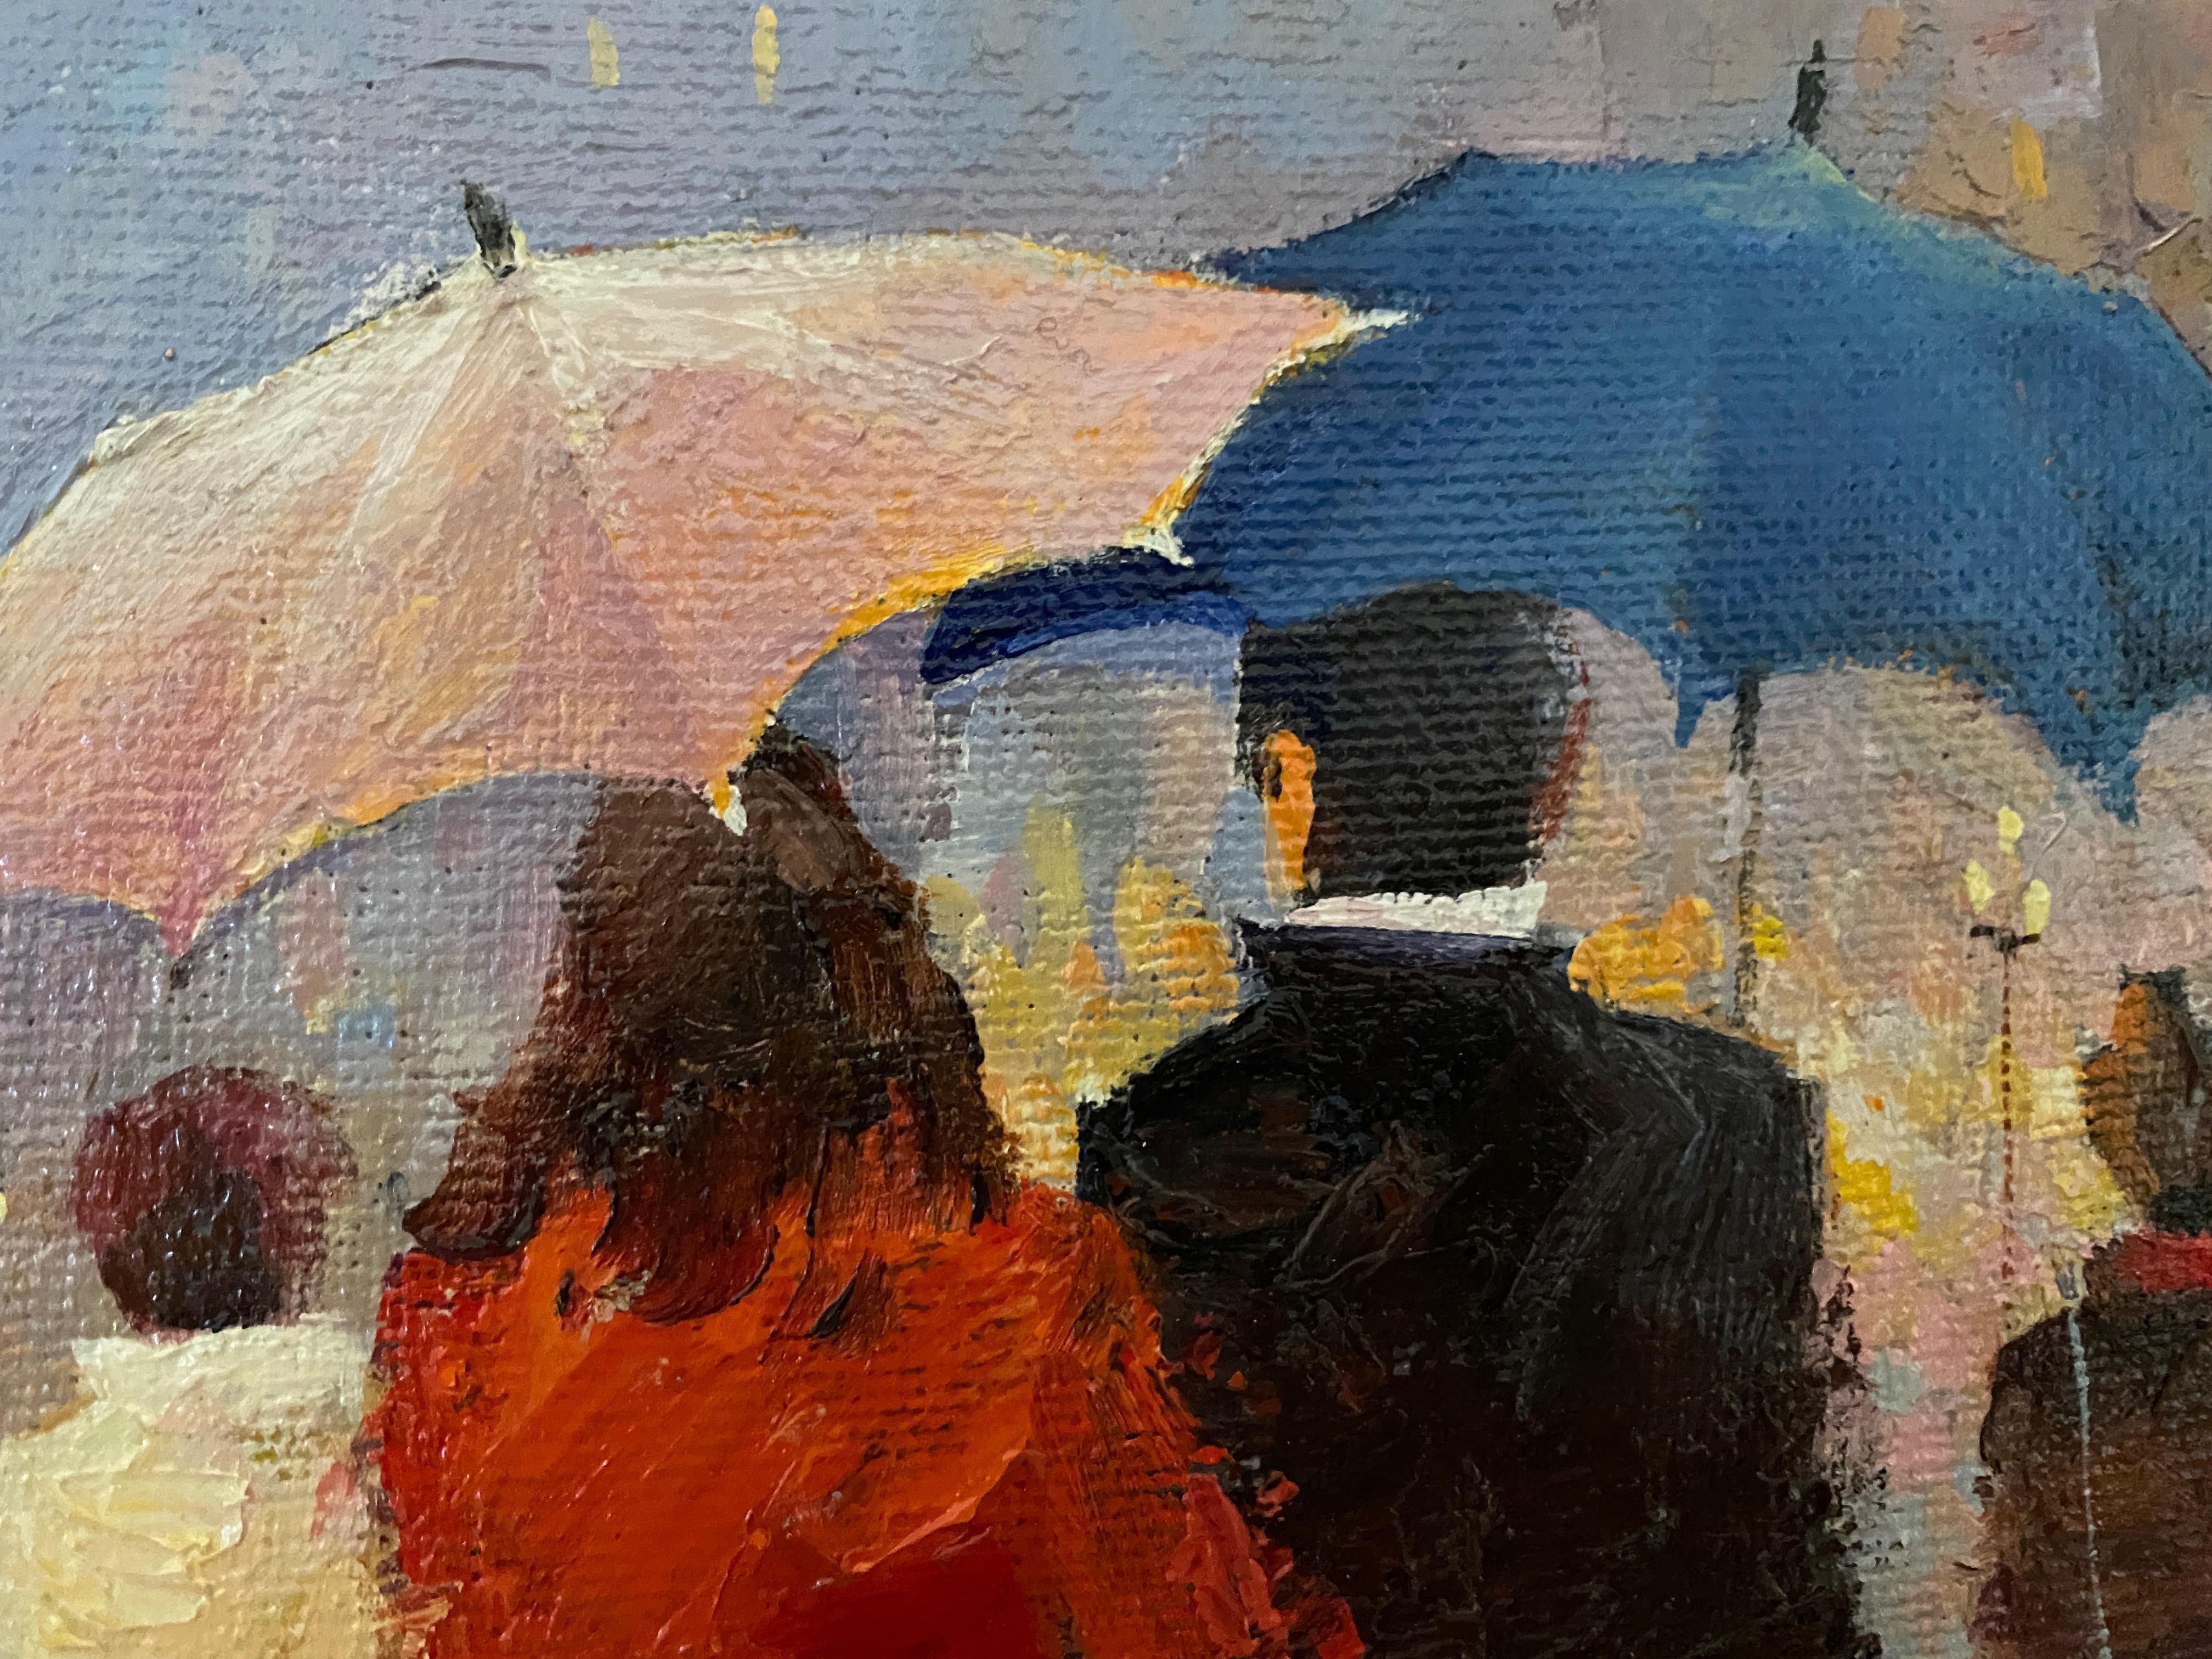 Rainy day. Oil on canvas. Impressionistic colorful street scene. For Sale 4